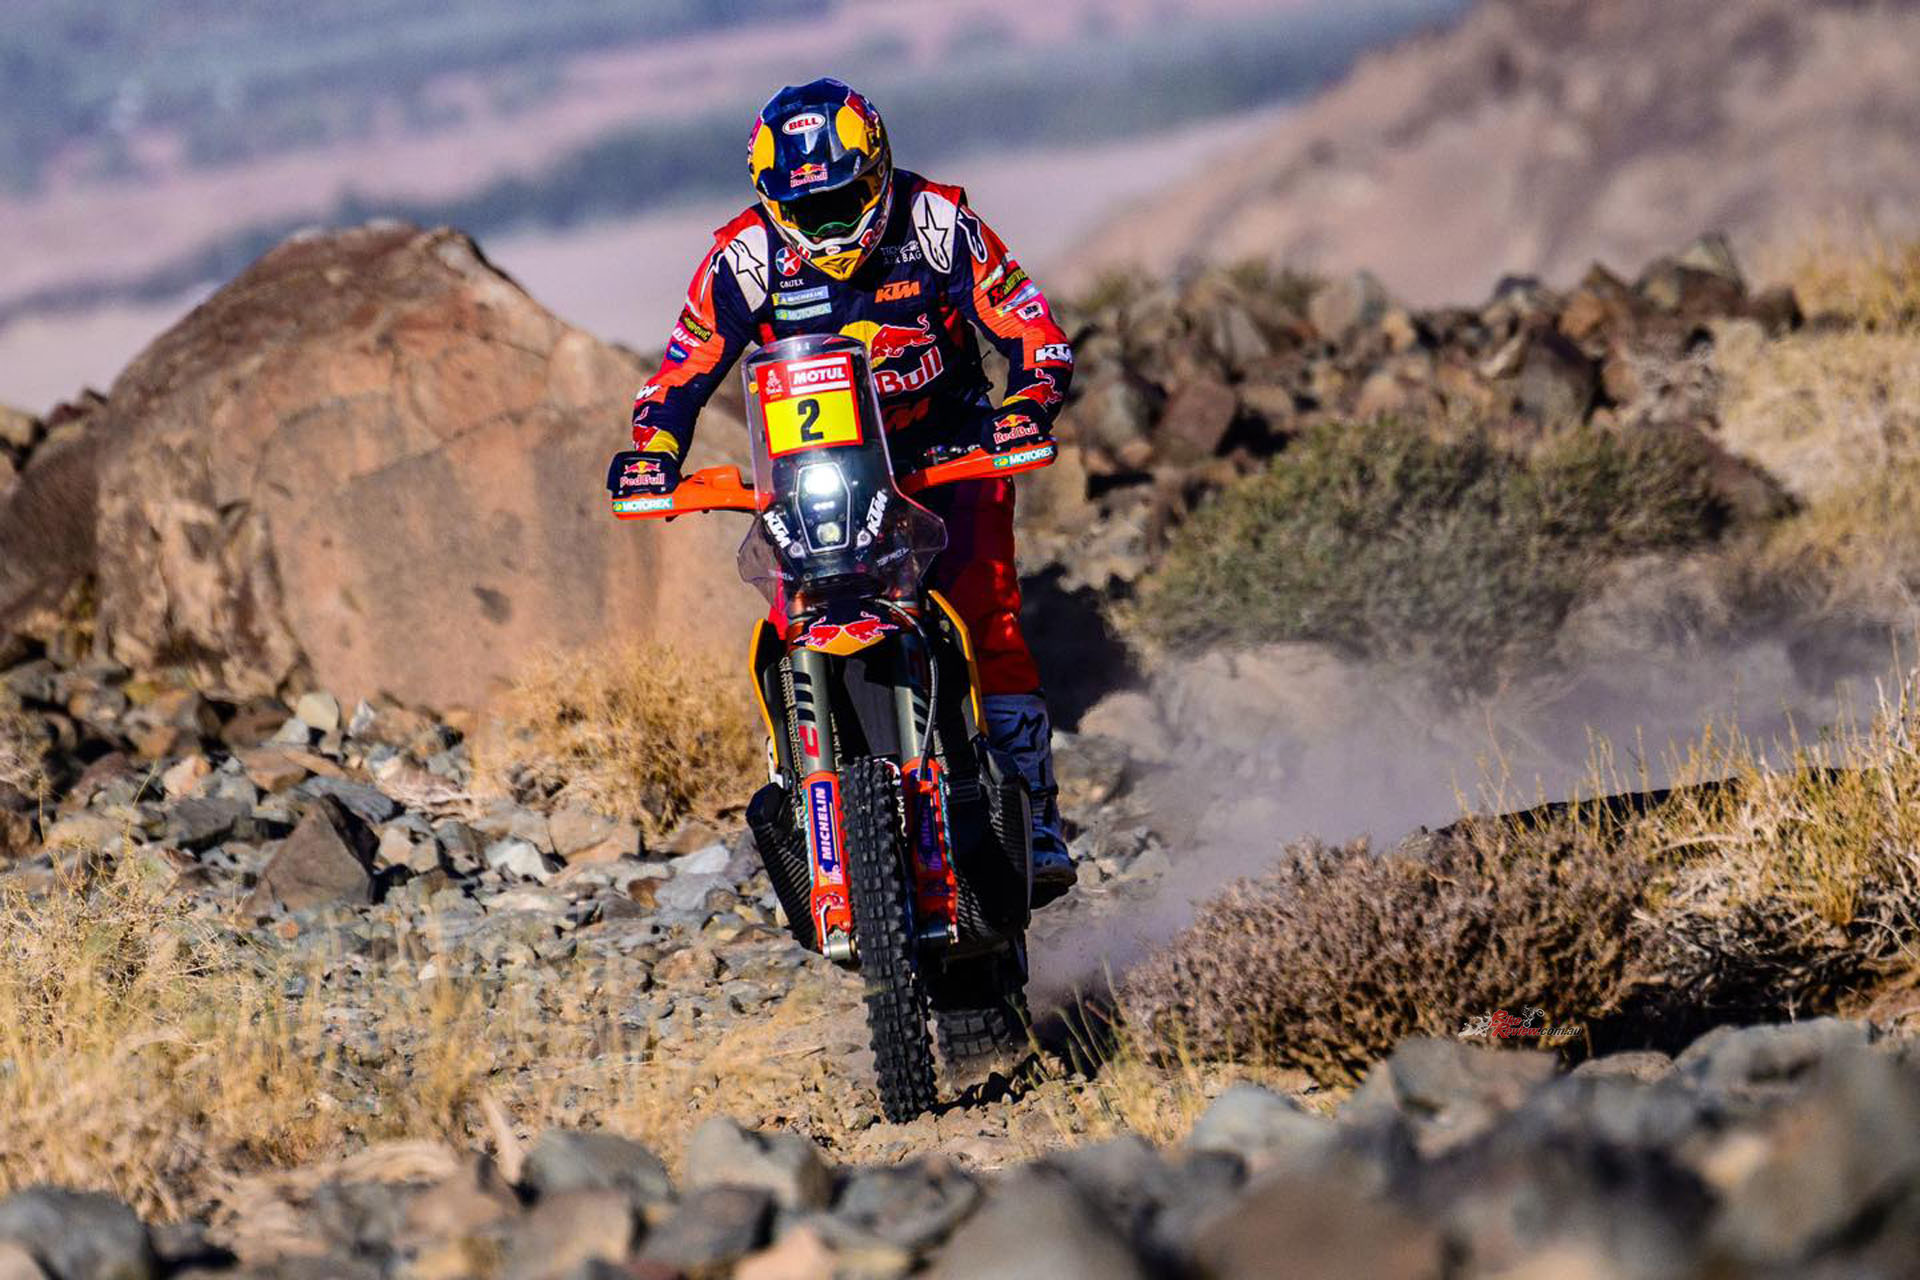 The Red Bull KTM Factory Racing star produced an accomplished showing in his 10th Dakar Rally to claim fifth.